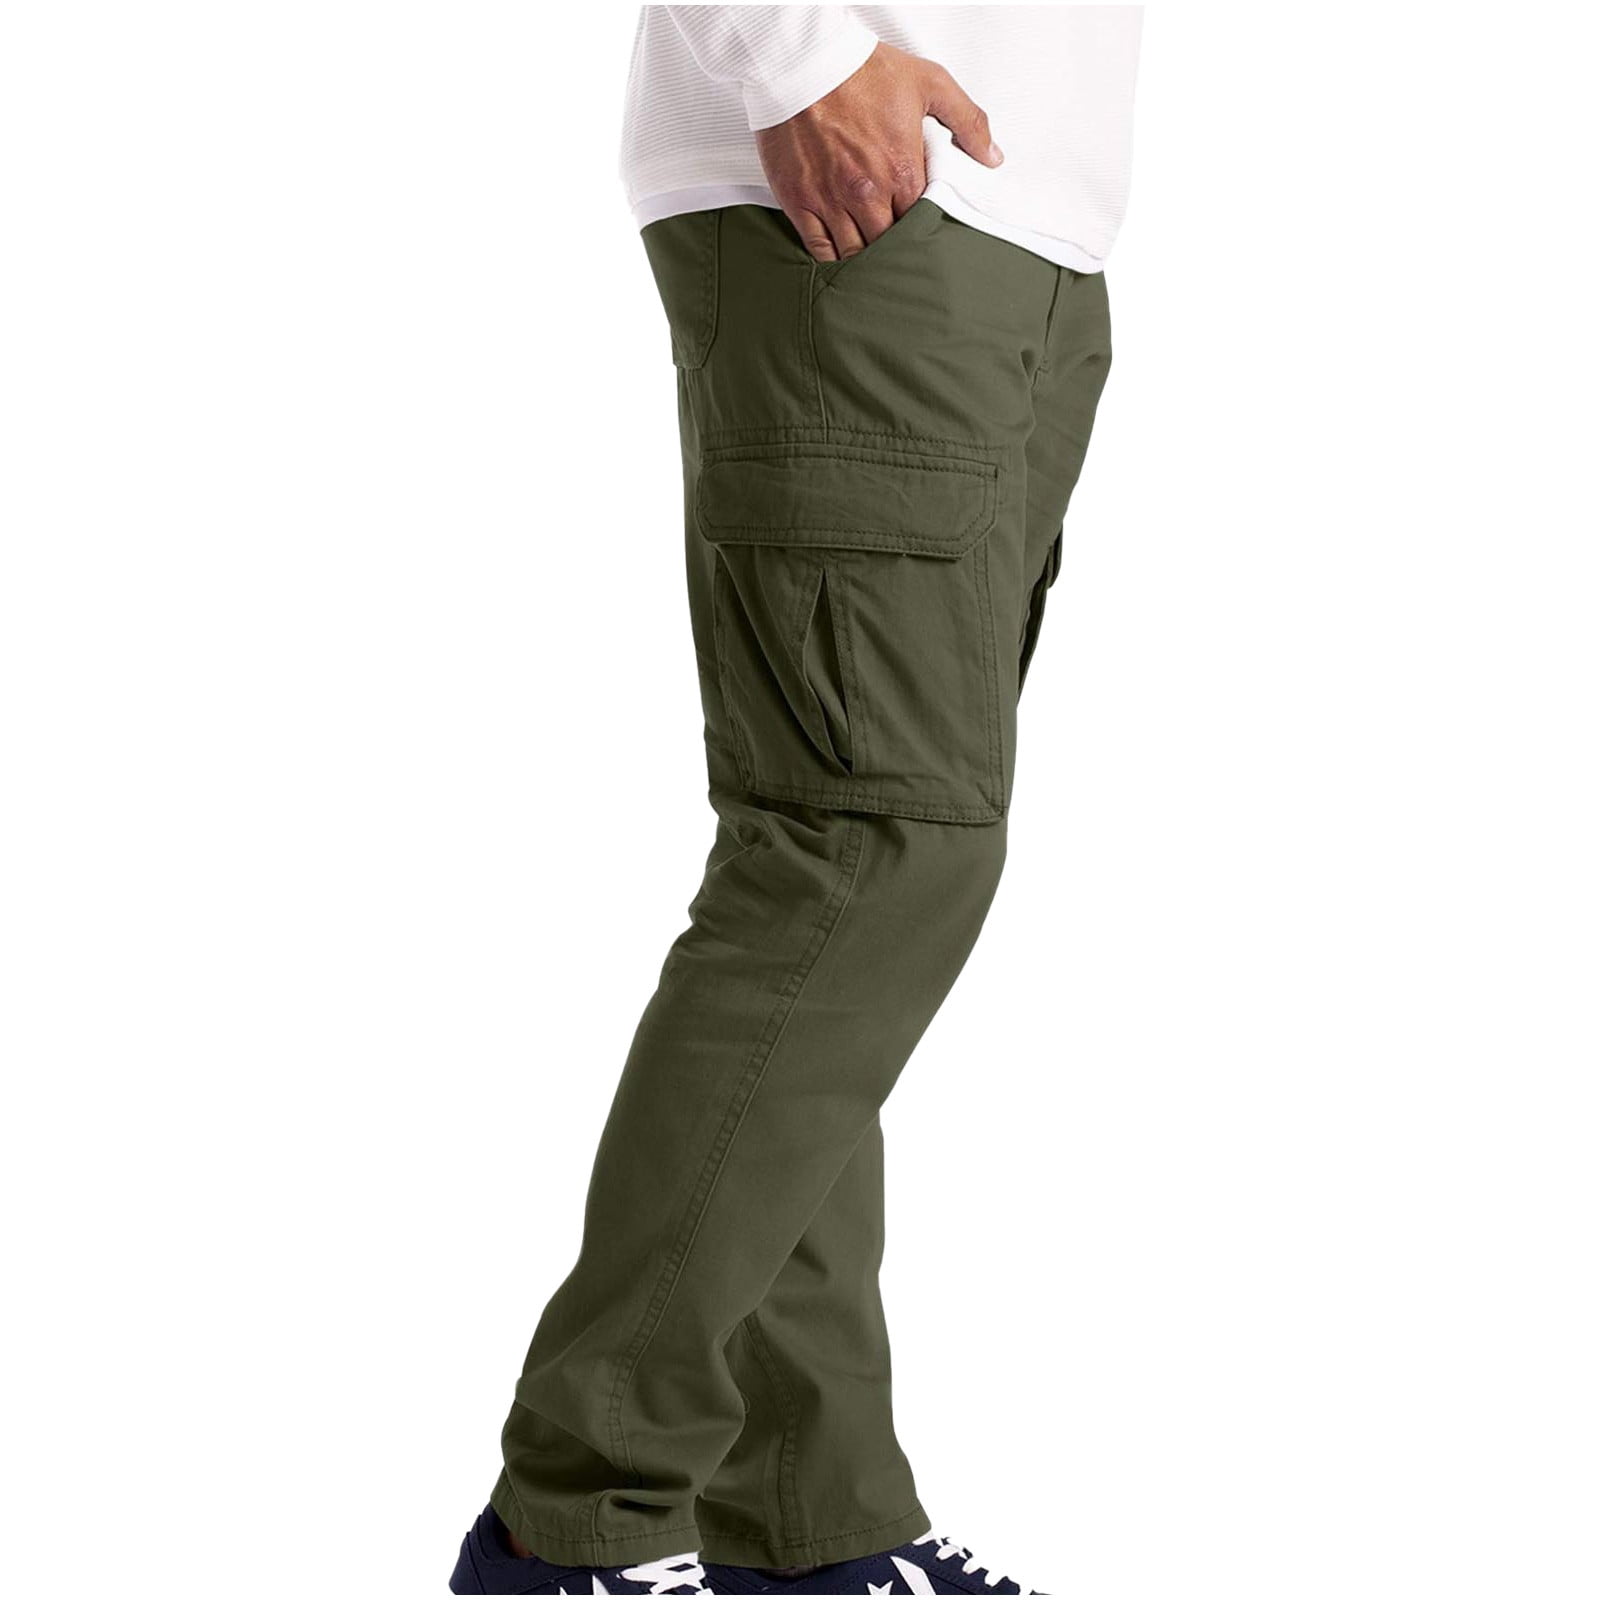 Ayolanni Army Green Cargo Pants Men's Cargo Trousers Work Wear Combat  Safety Cargo 6 Pocket Full Pants Large